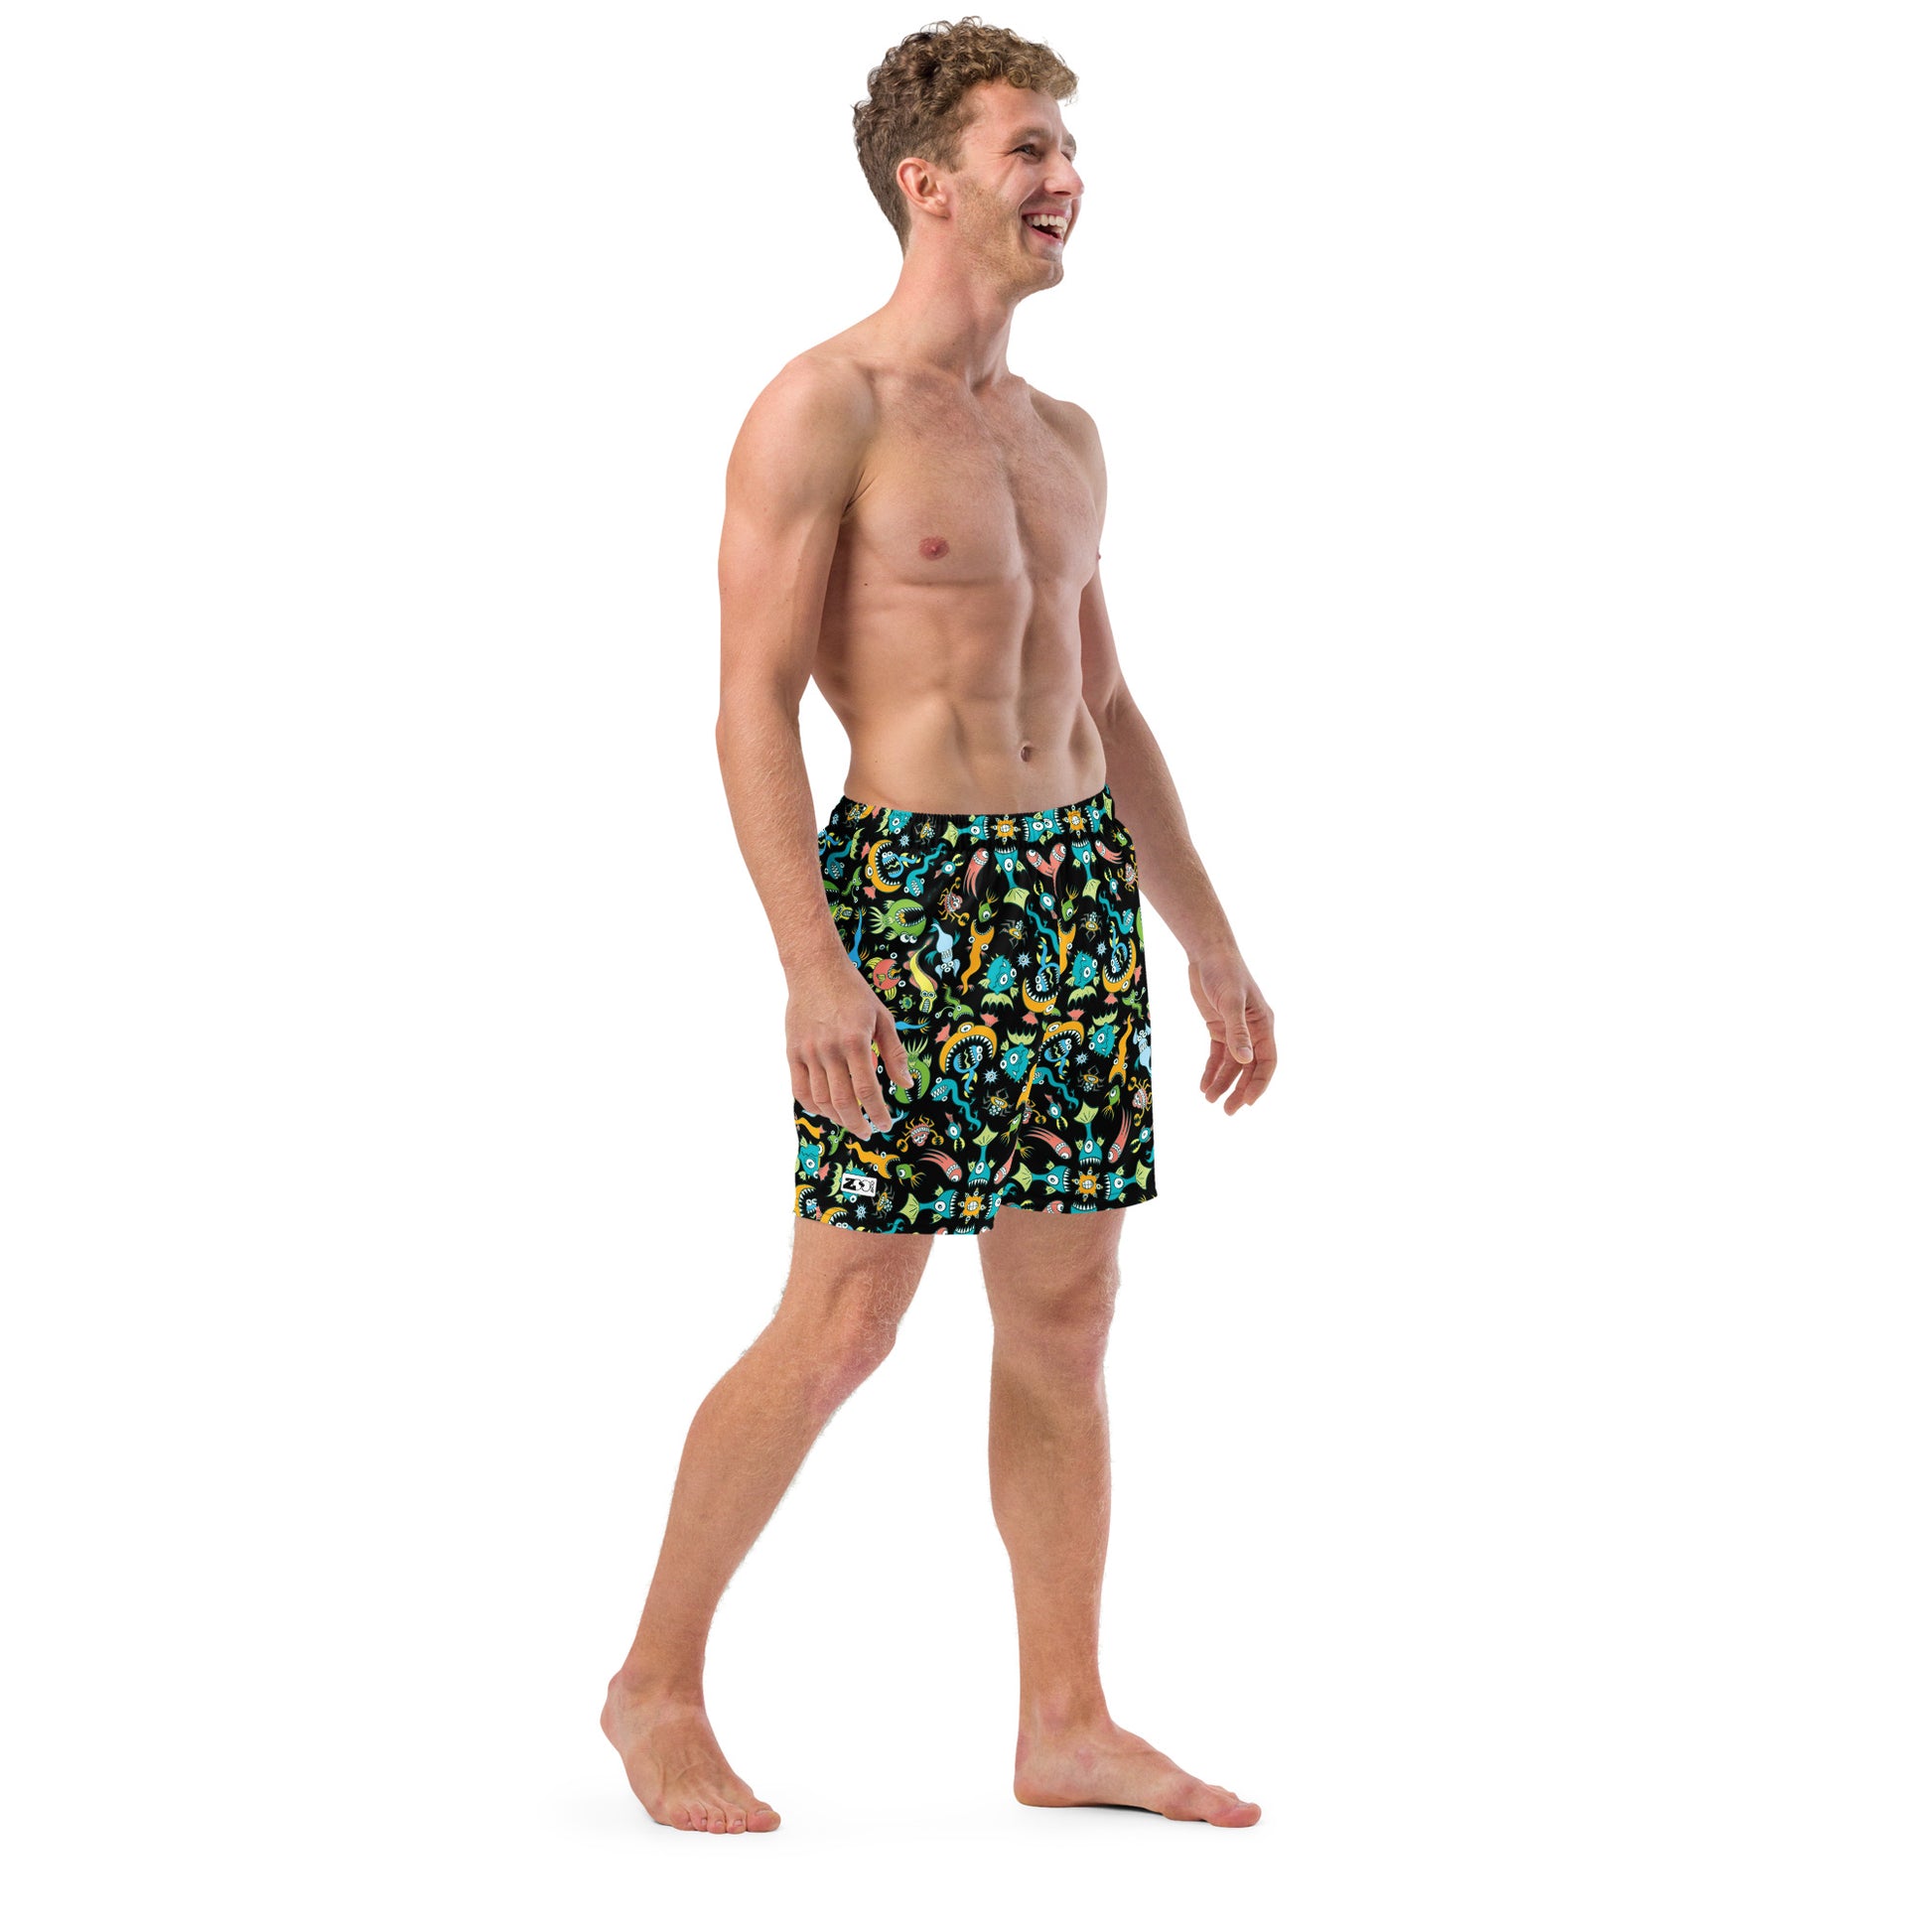 Happy man wearing Swim Trunks All-over printed with Sea creatures pattern design